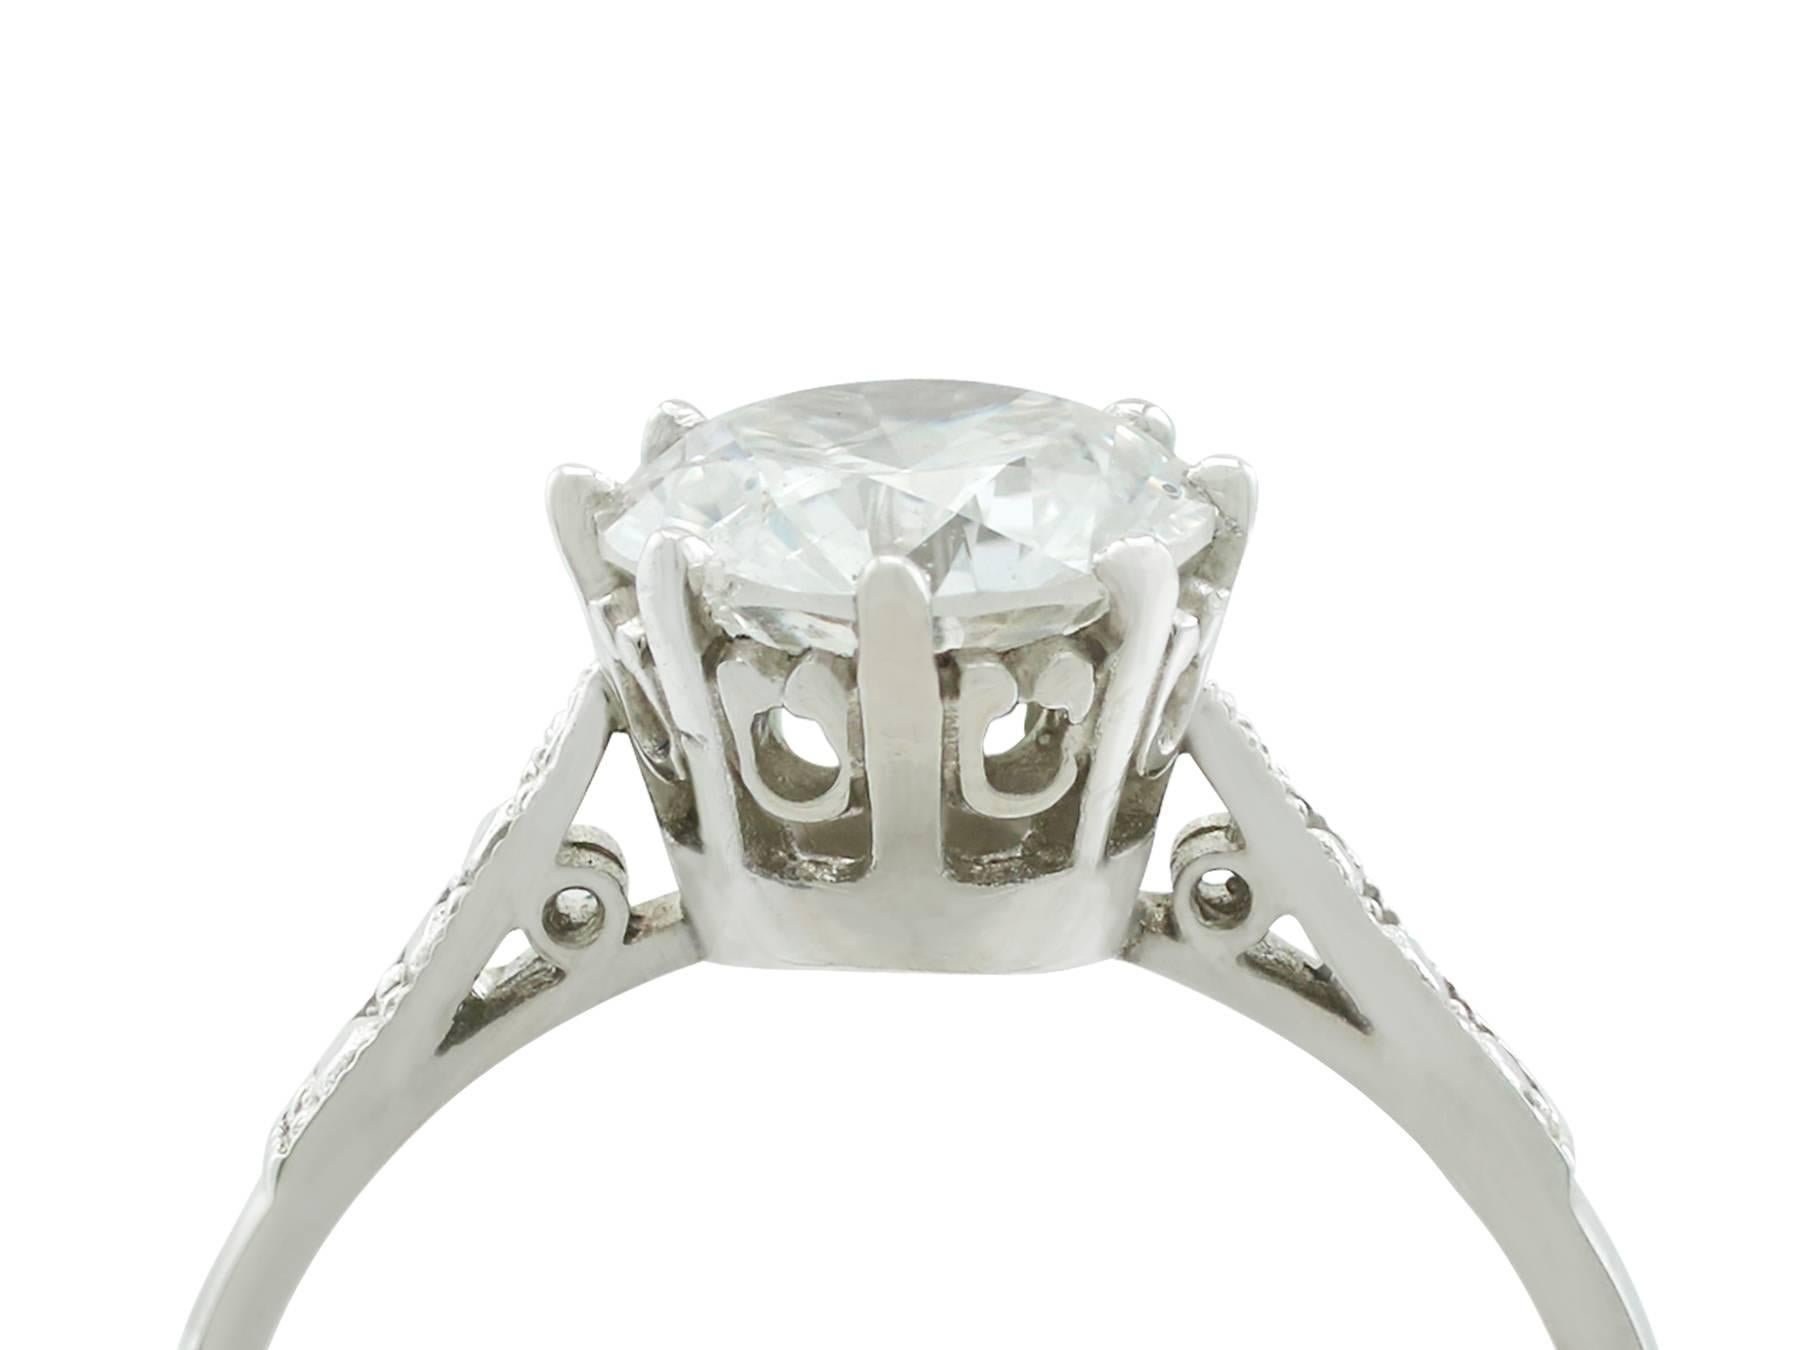 An exceptional, fine and impressive vintage 1.85 carat diamond and contemporary platinum solitaire ring; part of our diamond jewelry/estate jewelry collections

This impressive diamond solitaire ring has been crafted in platinum.

The vintage 1.85